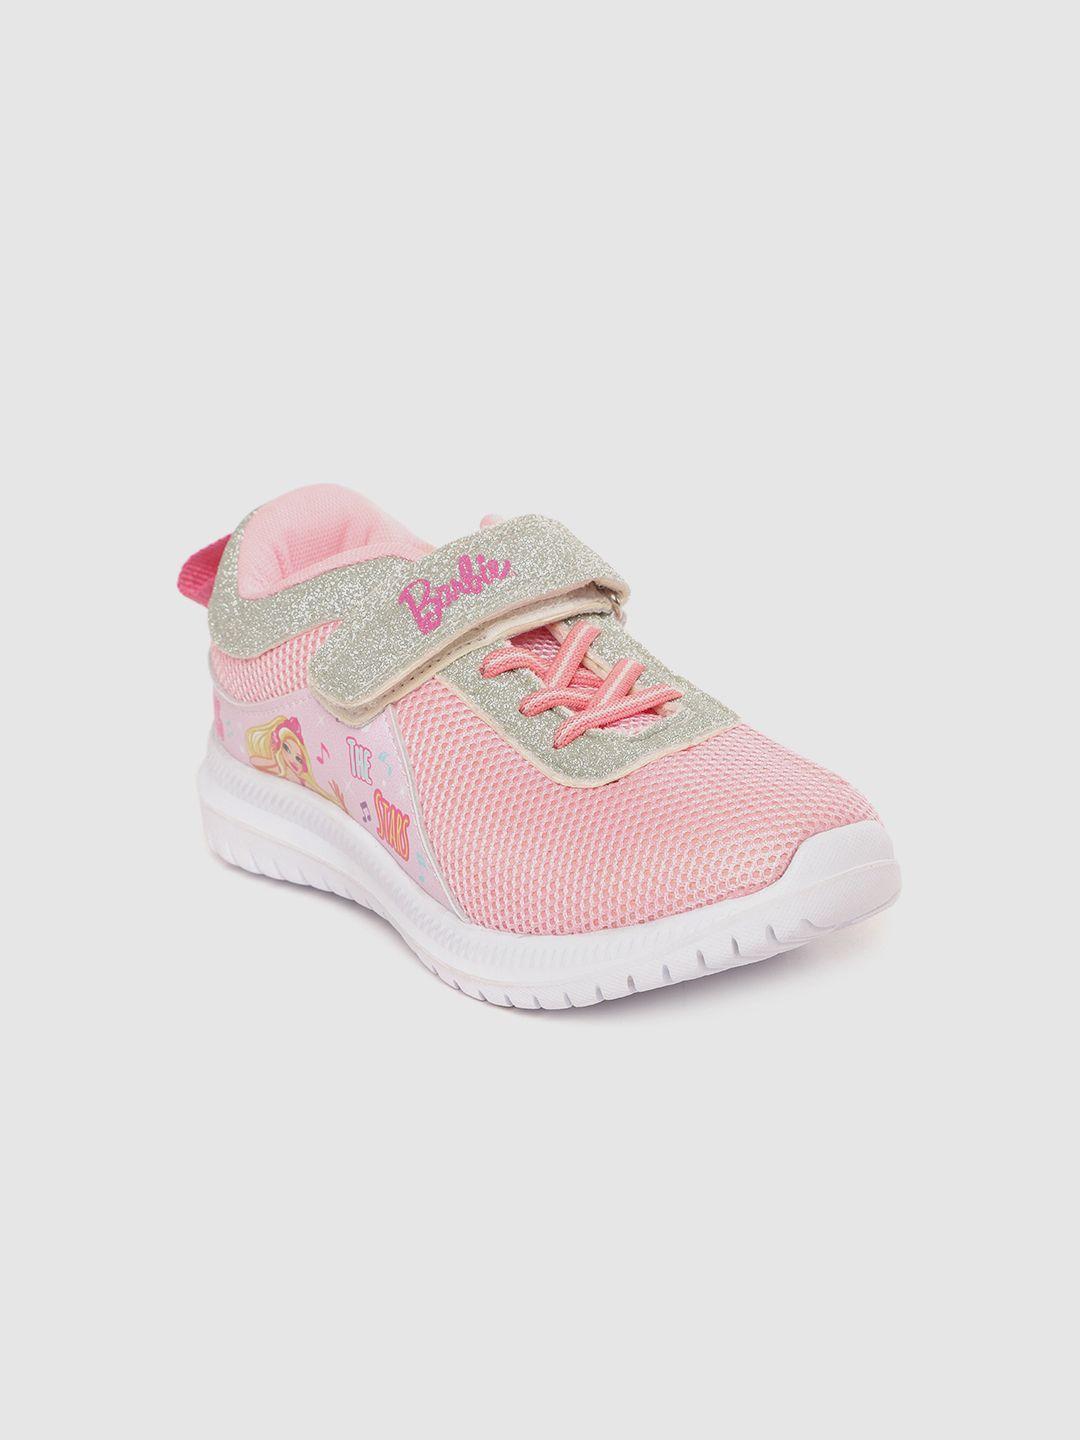 toothless-girls-pink-&-silver-toned-woven-design-barbie-print-running-shoes